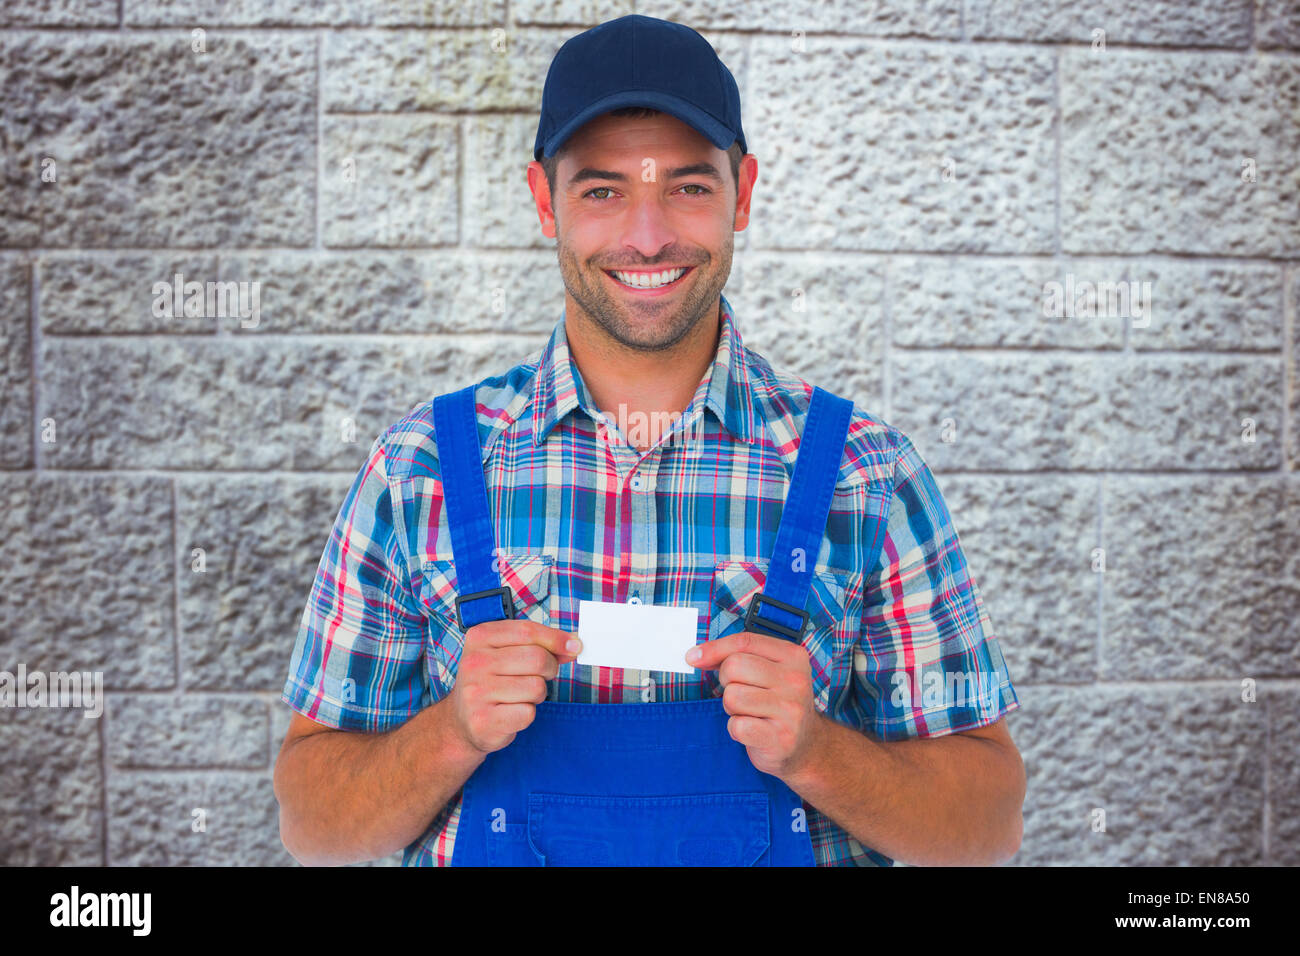 Composite image of portrait of happy handyman holding visiting card Stock Photo